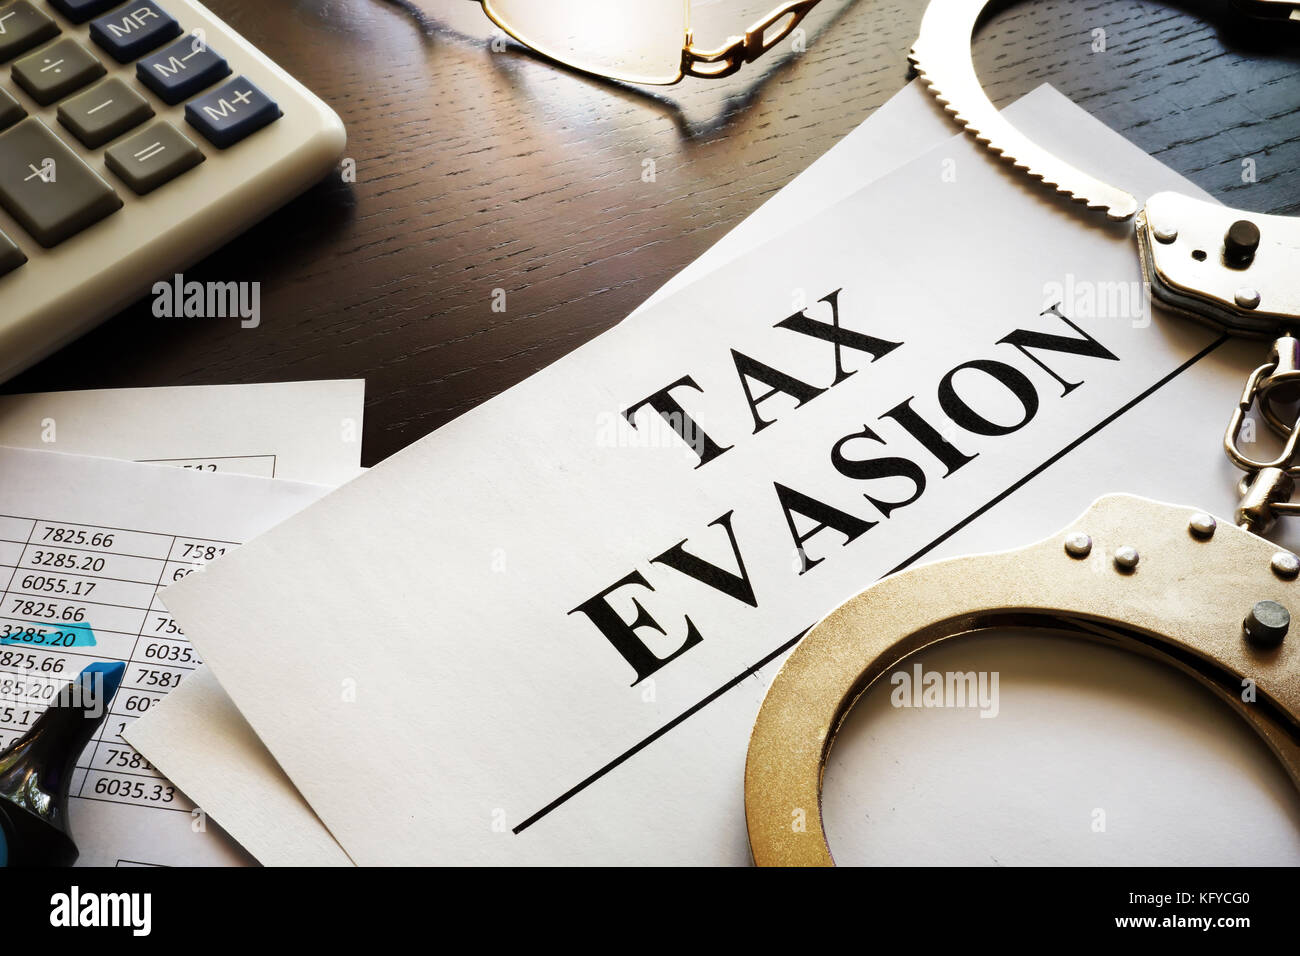 Papers about tax evasion on a desk. Tax avoidance concept. Stock Photo